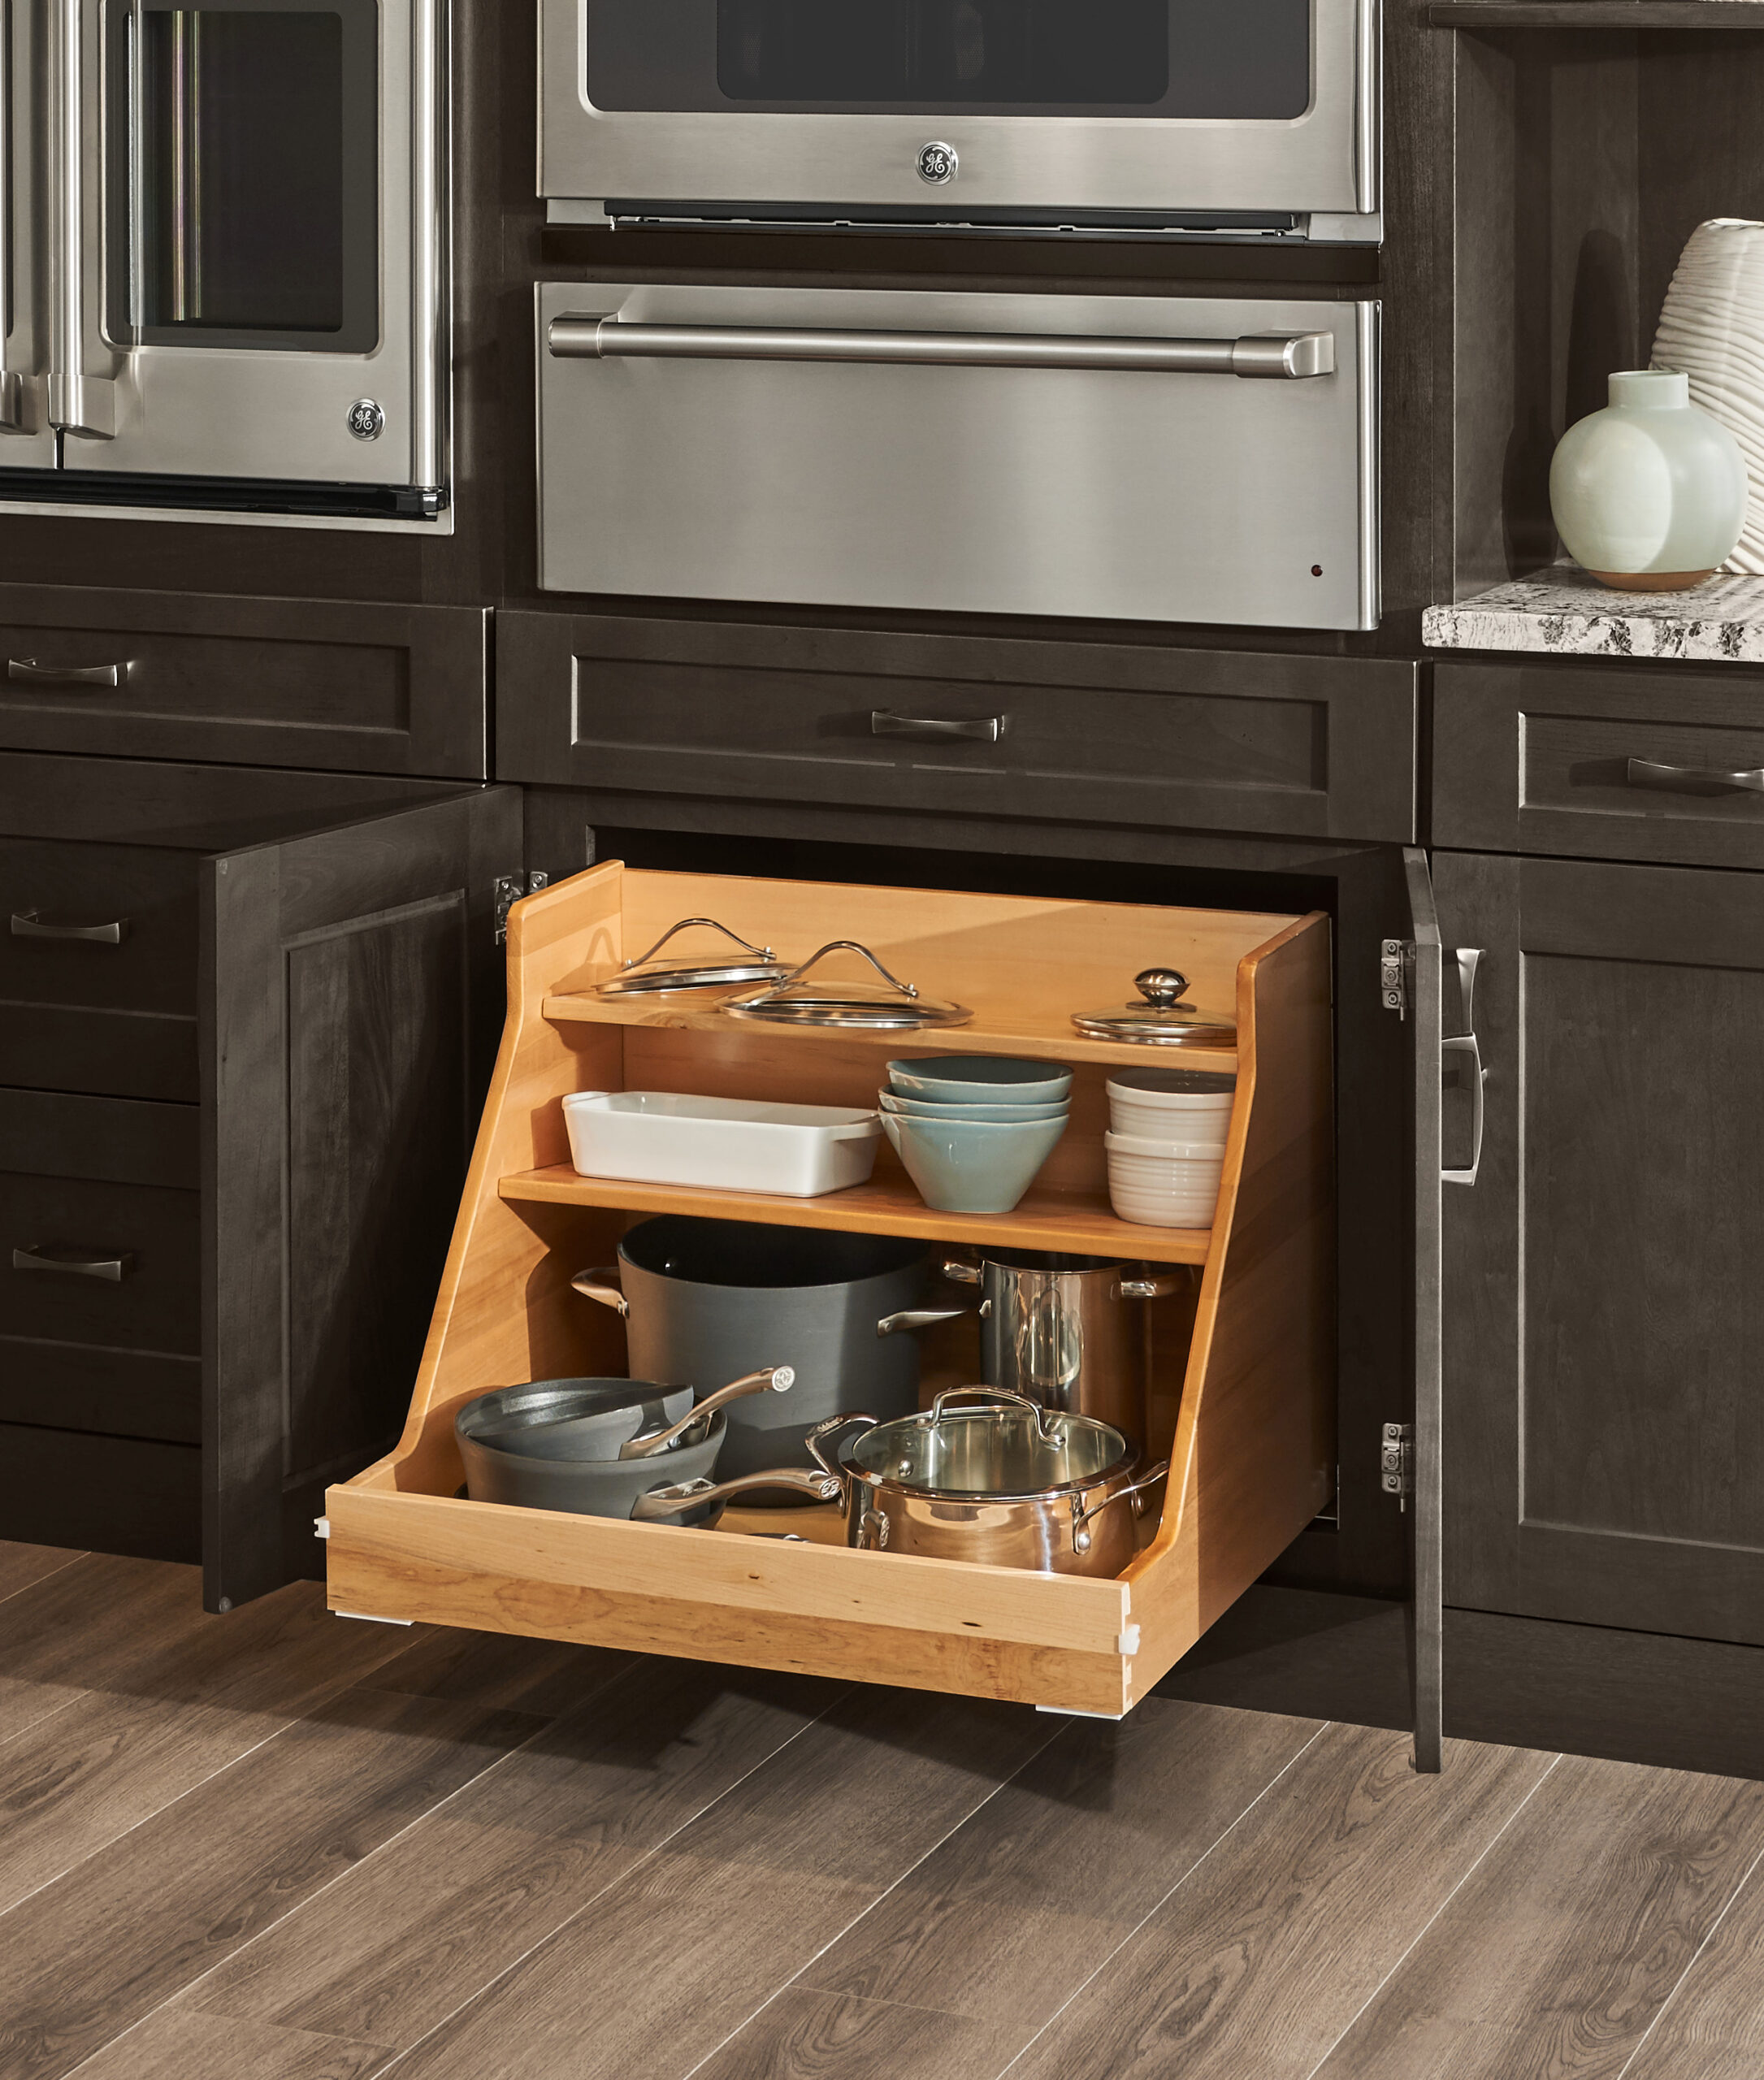 Pots and Pans Kitchen Cabinet Organizer Pull-Out Shelves